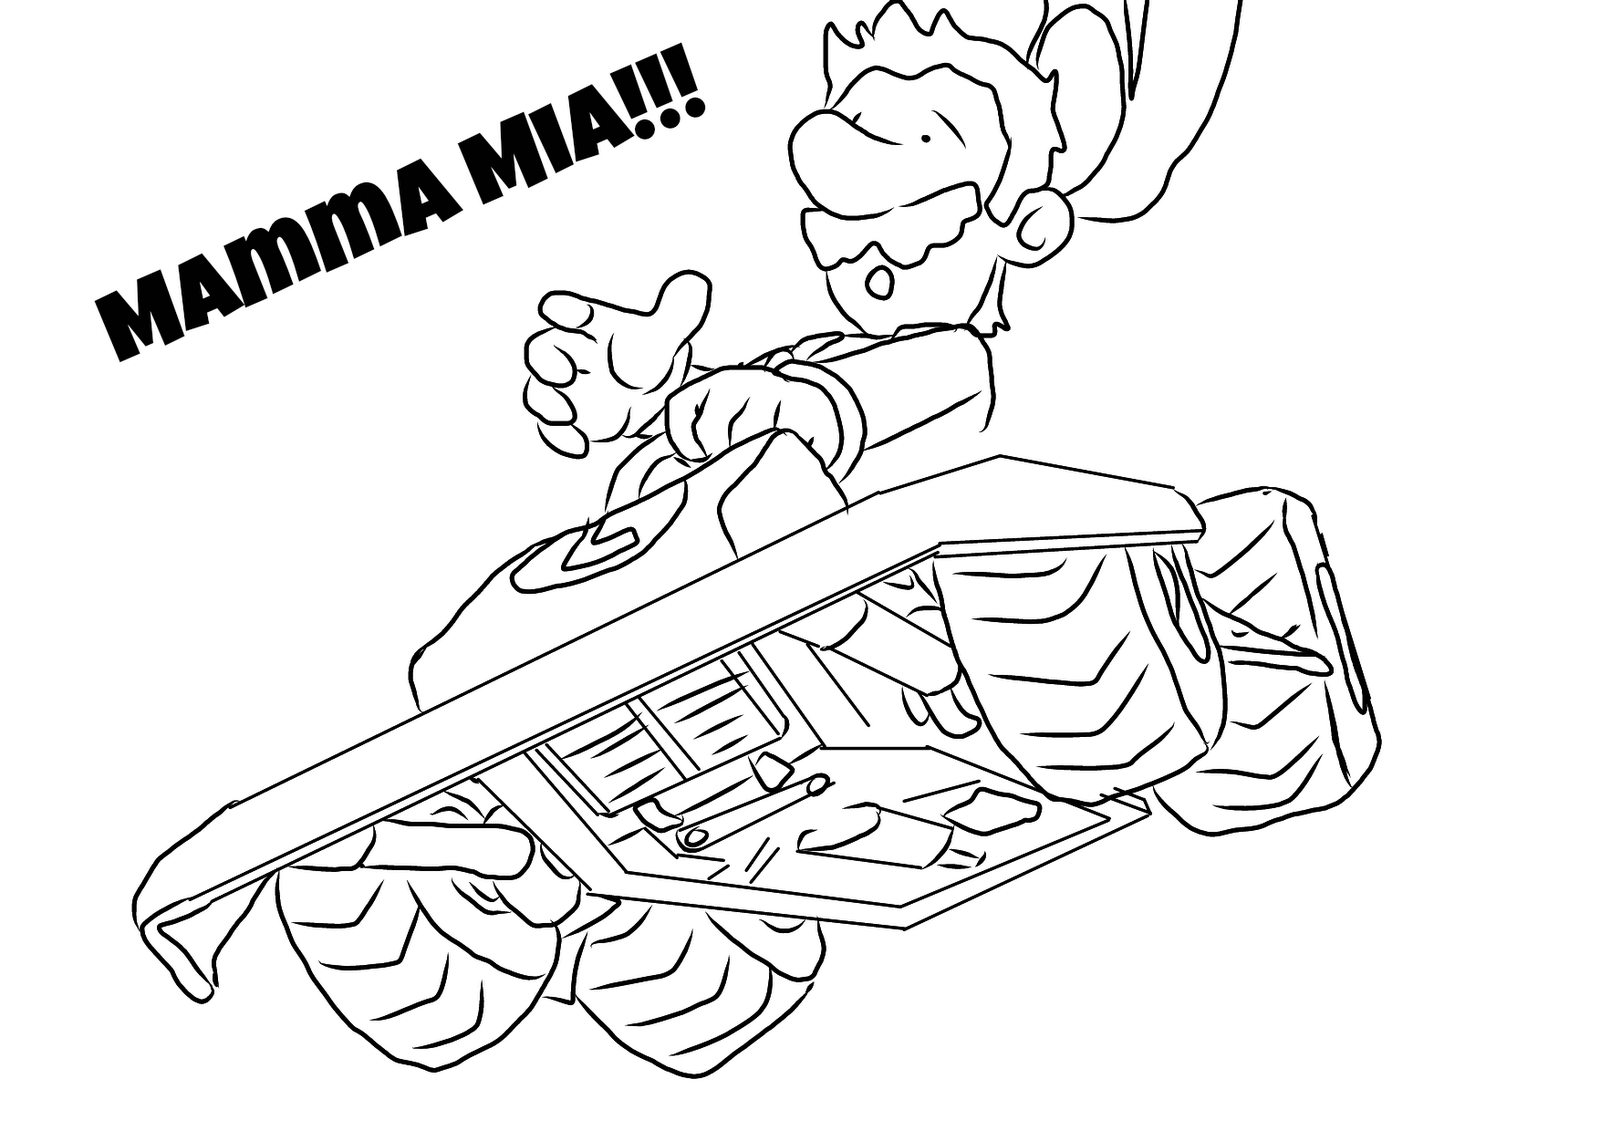 Download Favour in Fun: Mario Kart Colouring Pages